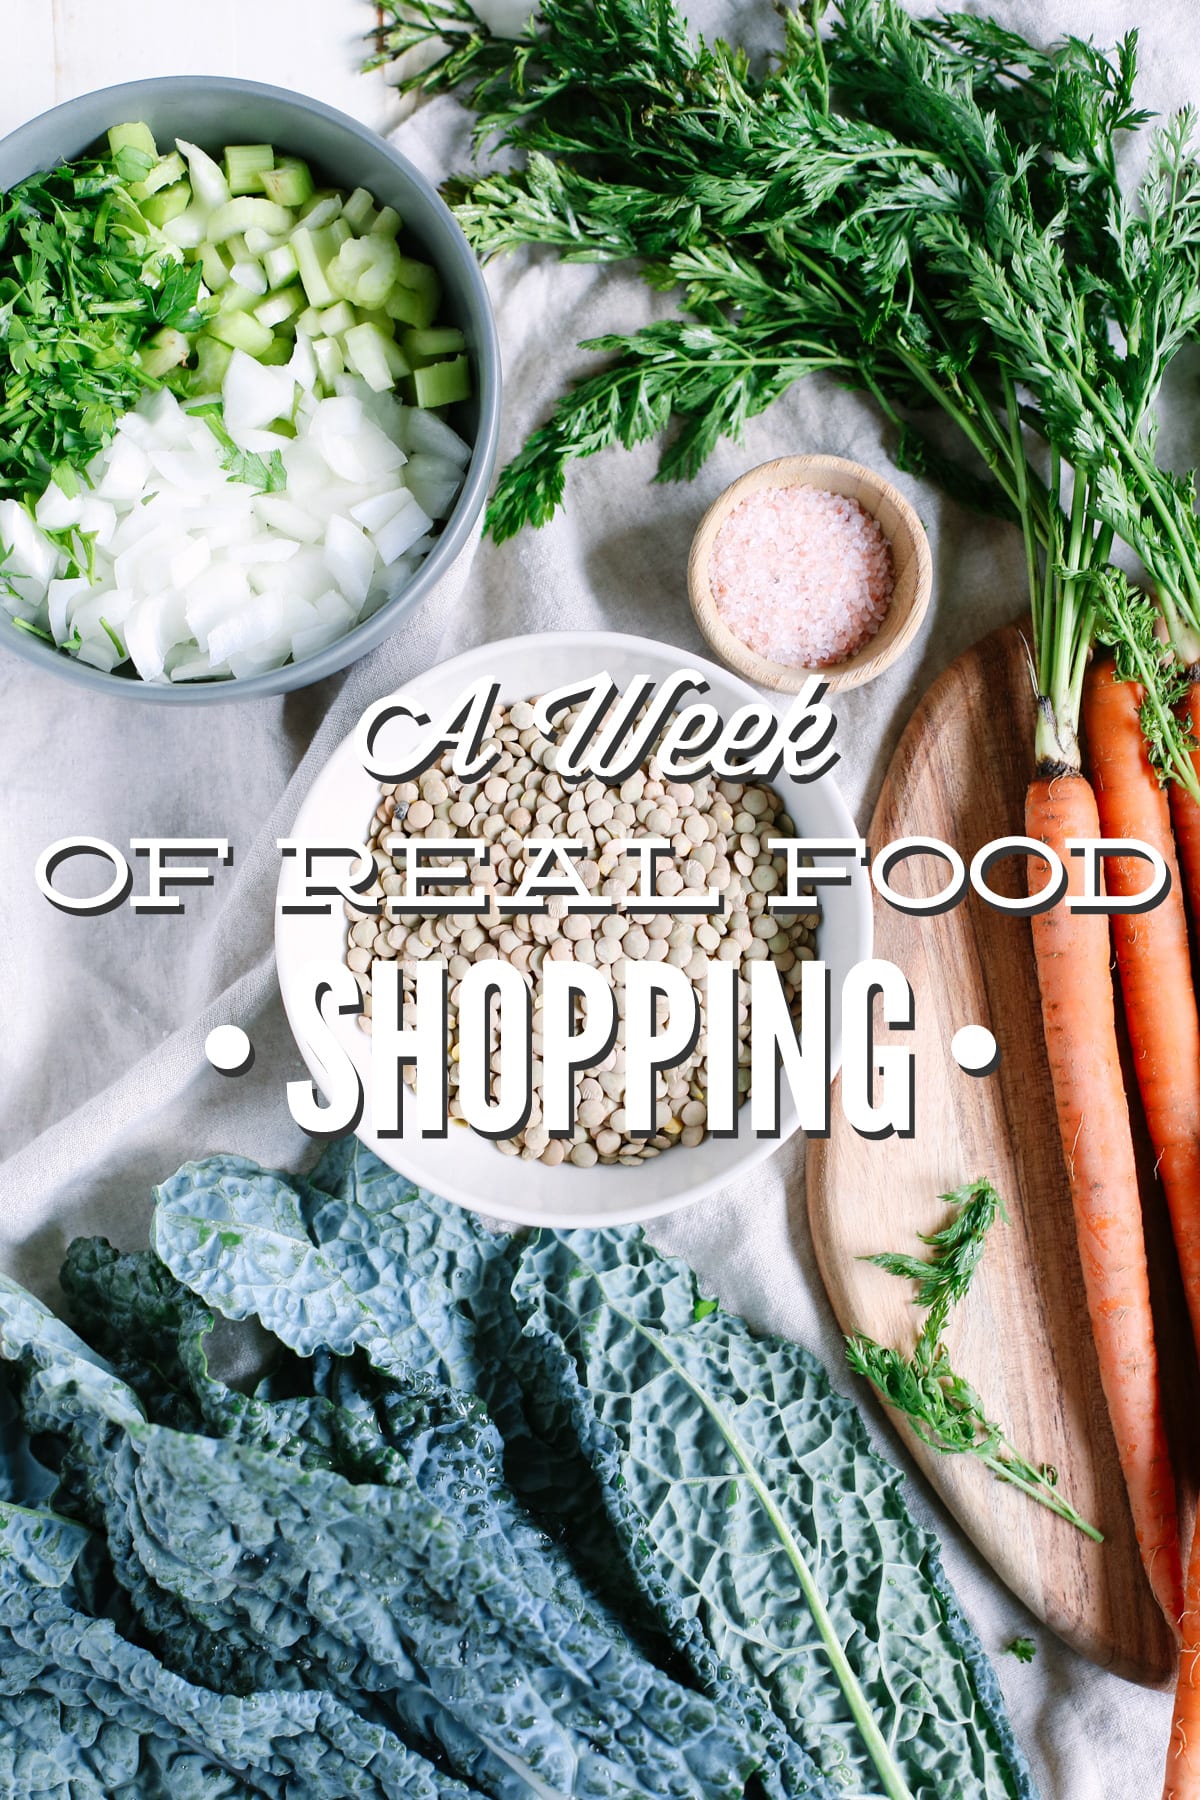 A Week of Real Food Shopping: Video Guide